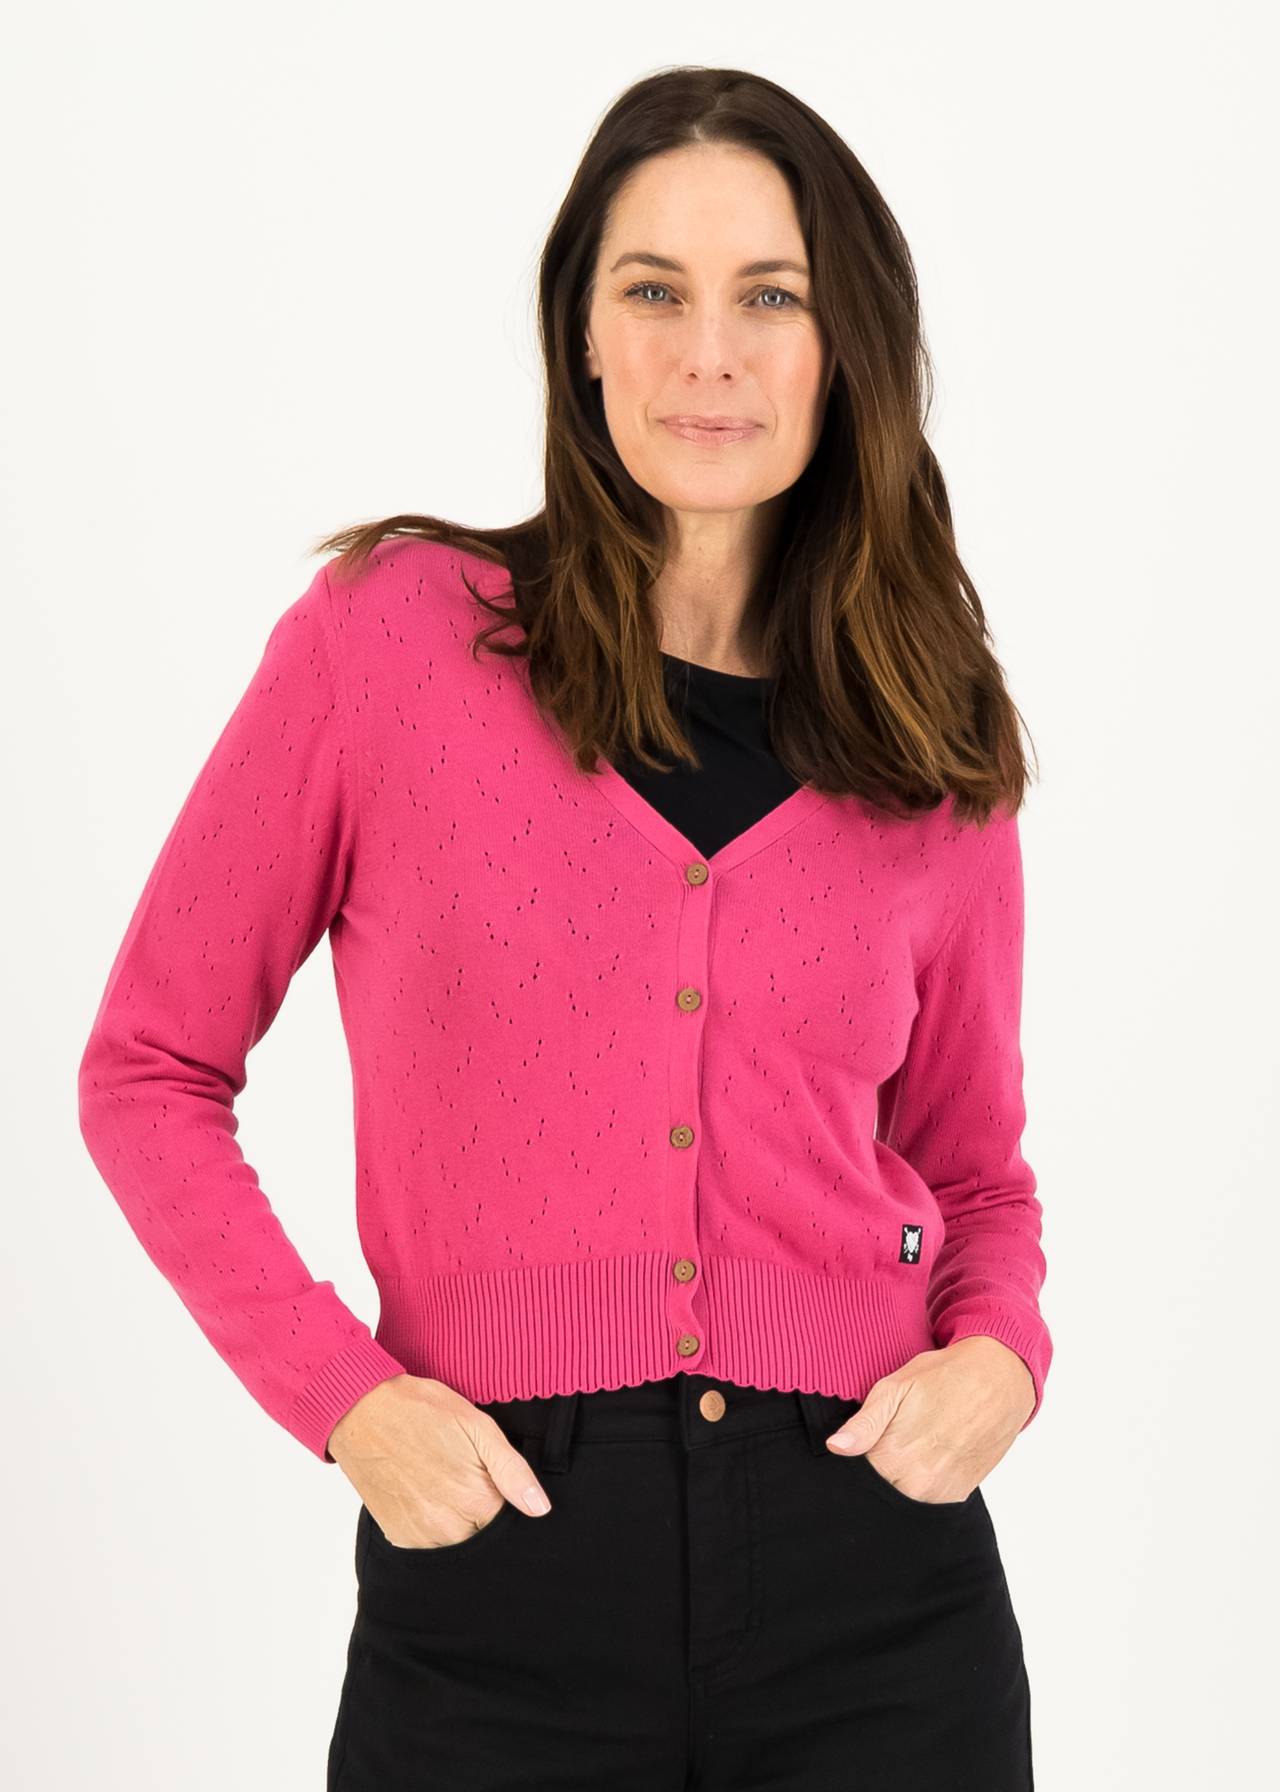 Blutsgeschwister Cardigan Save the World, Farbe: stunningly rose knit